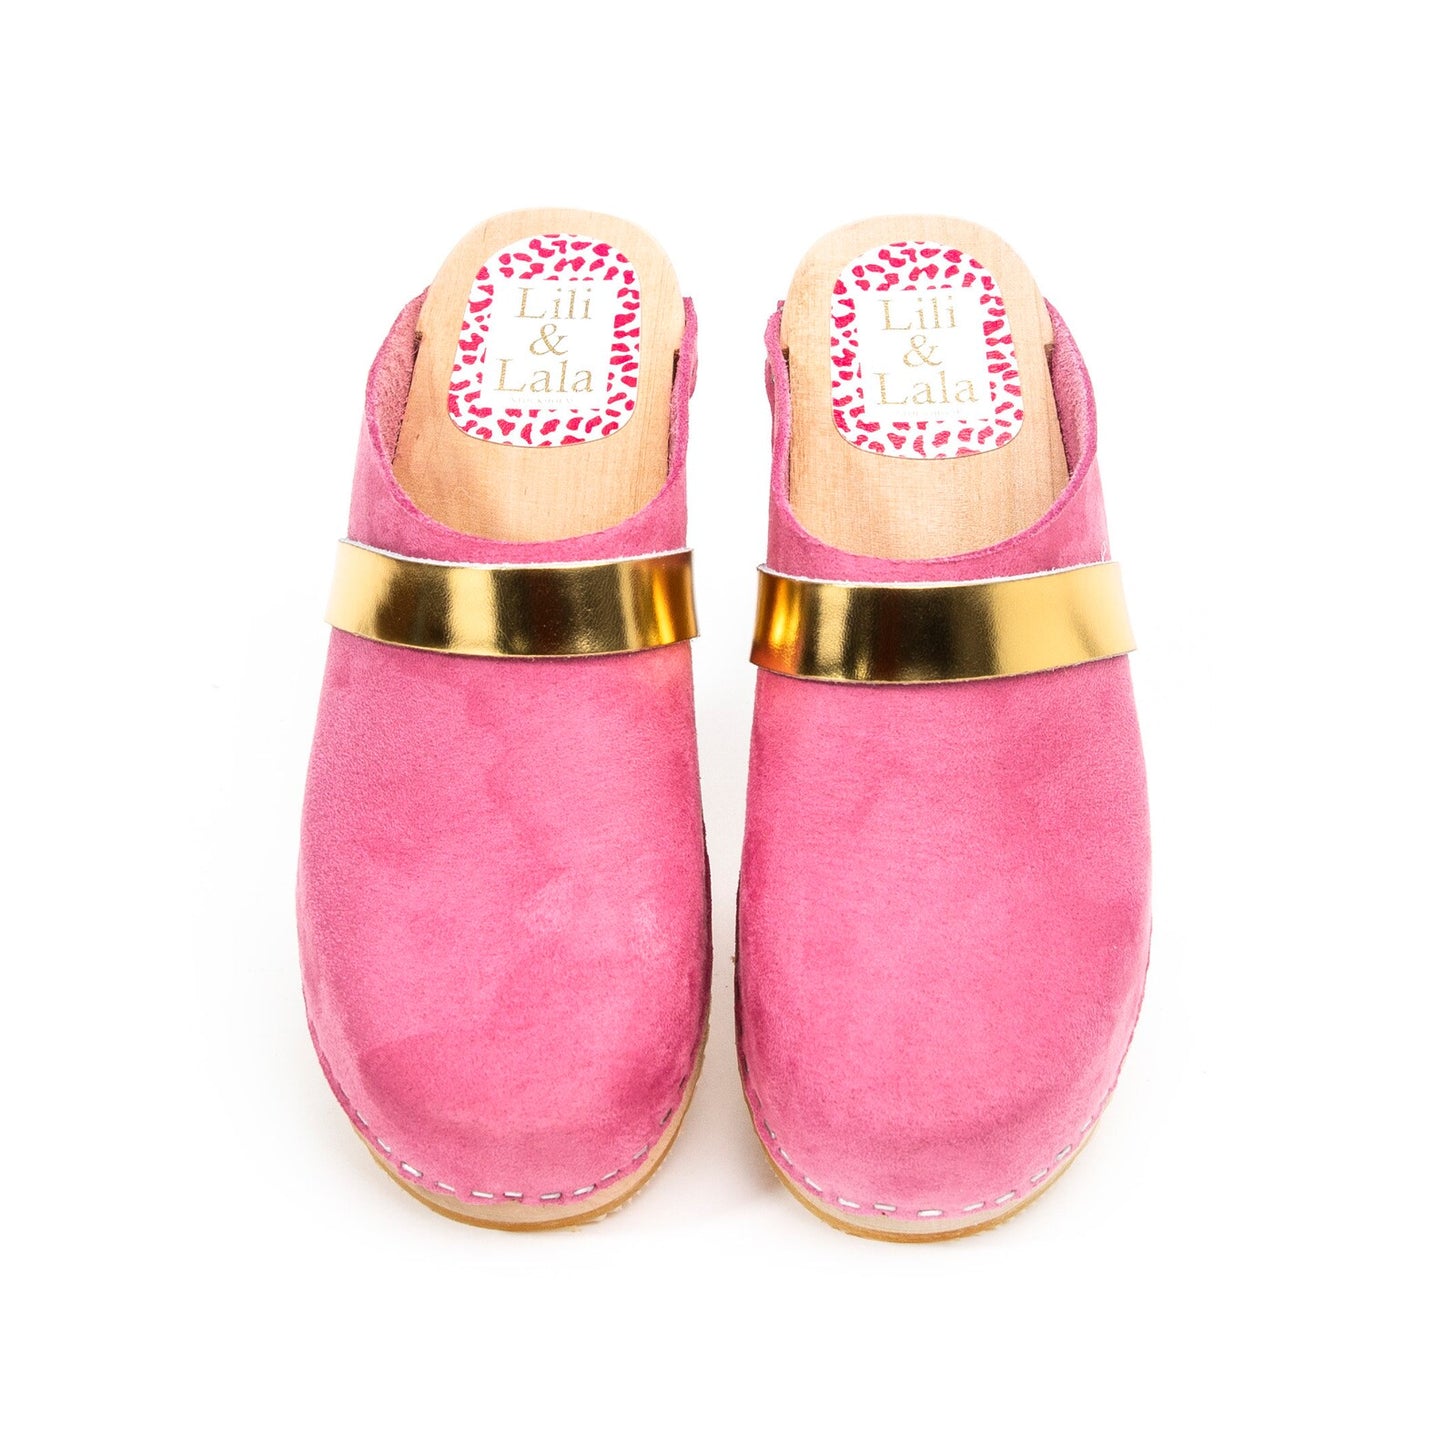 Pink Leather & Wood Handmade Clogs